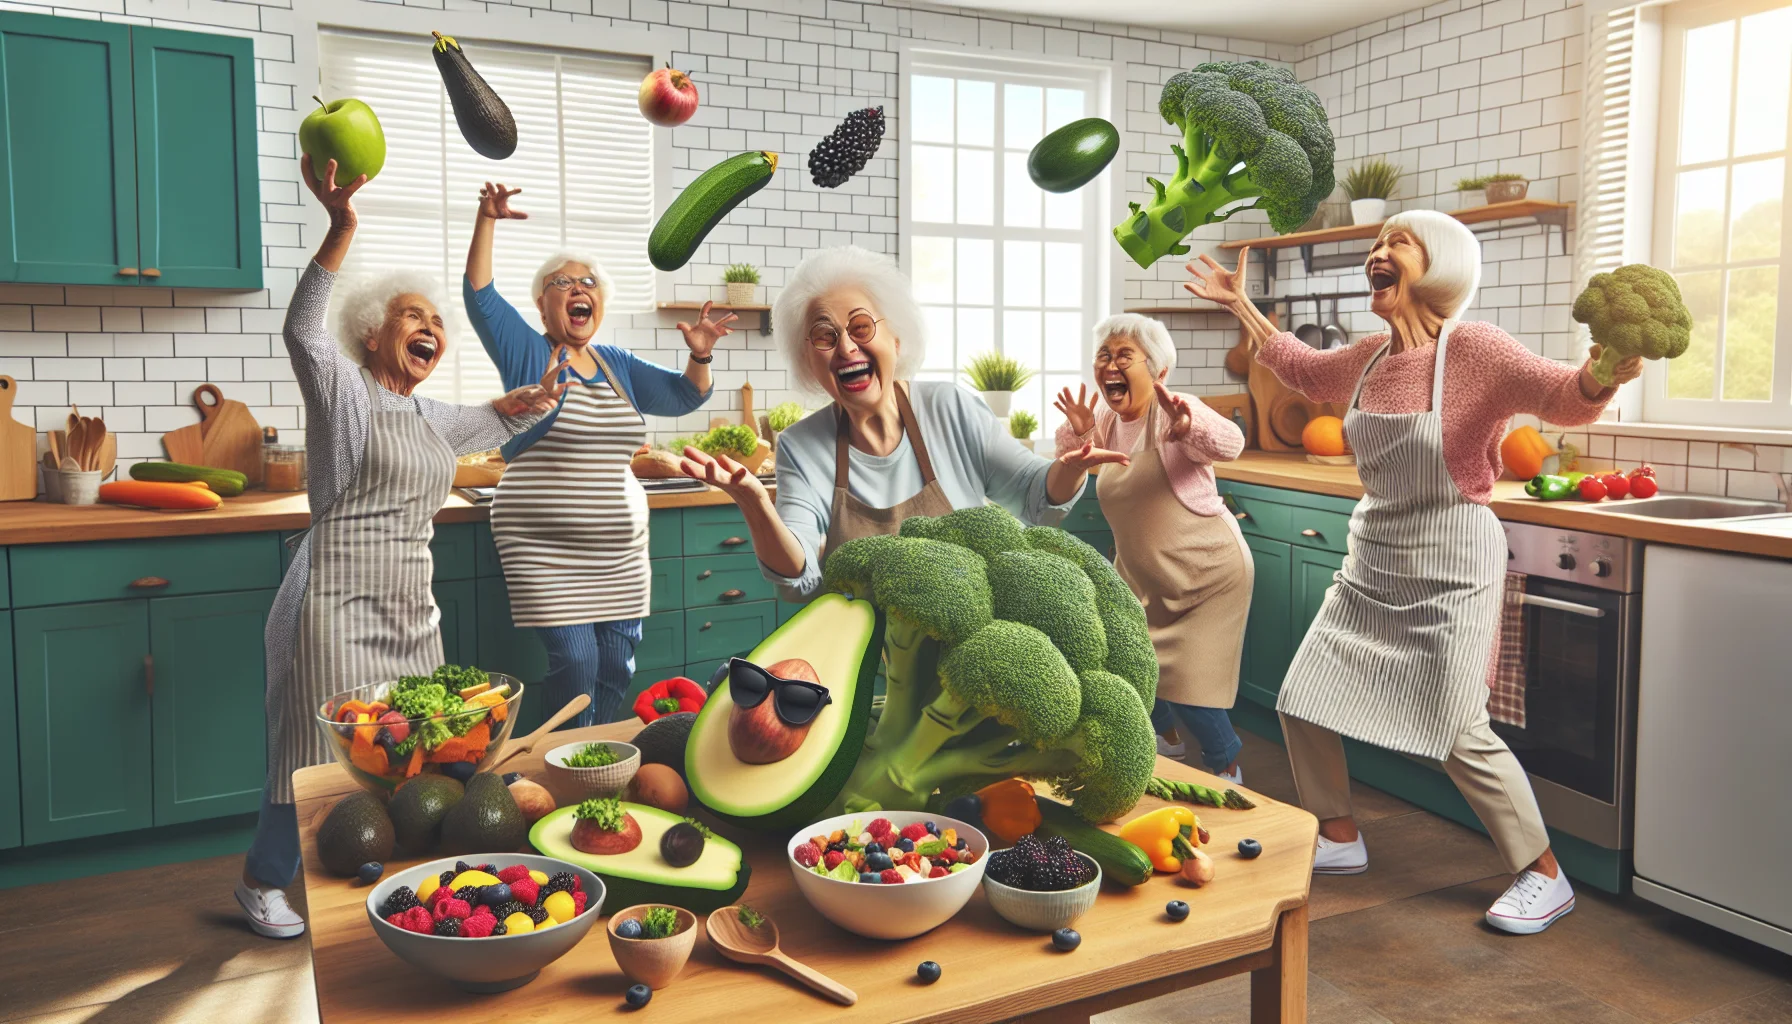 Create a humorous, realistic scene in a sunny, open-concept kitchen. A group of energetic old women with diverse descents: Caucasian, Hispanic, Black, Middle-Eastern, and South Asian, are enthusiastically preparing a variety of fiber-rich, low-carb foods. One of them is dramatically presenting a huge broccoli, while another is joyfully juggling avocados. Another one is artistically arranging a platter of mixed berries while chuckling. One Asian lady stoops to pick up a rolling zucchini, their laughter filling the room. To make it more fun, depict some of the food items wearing sunglasses and doing funny expressions.